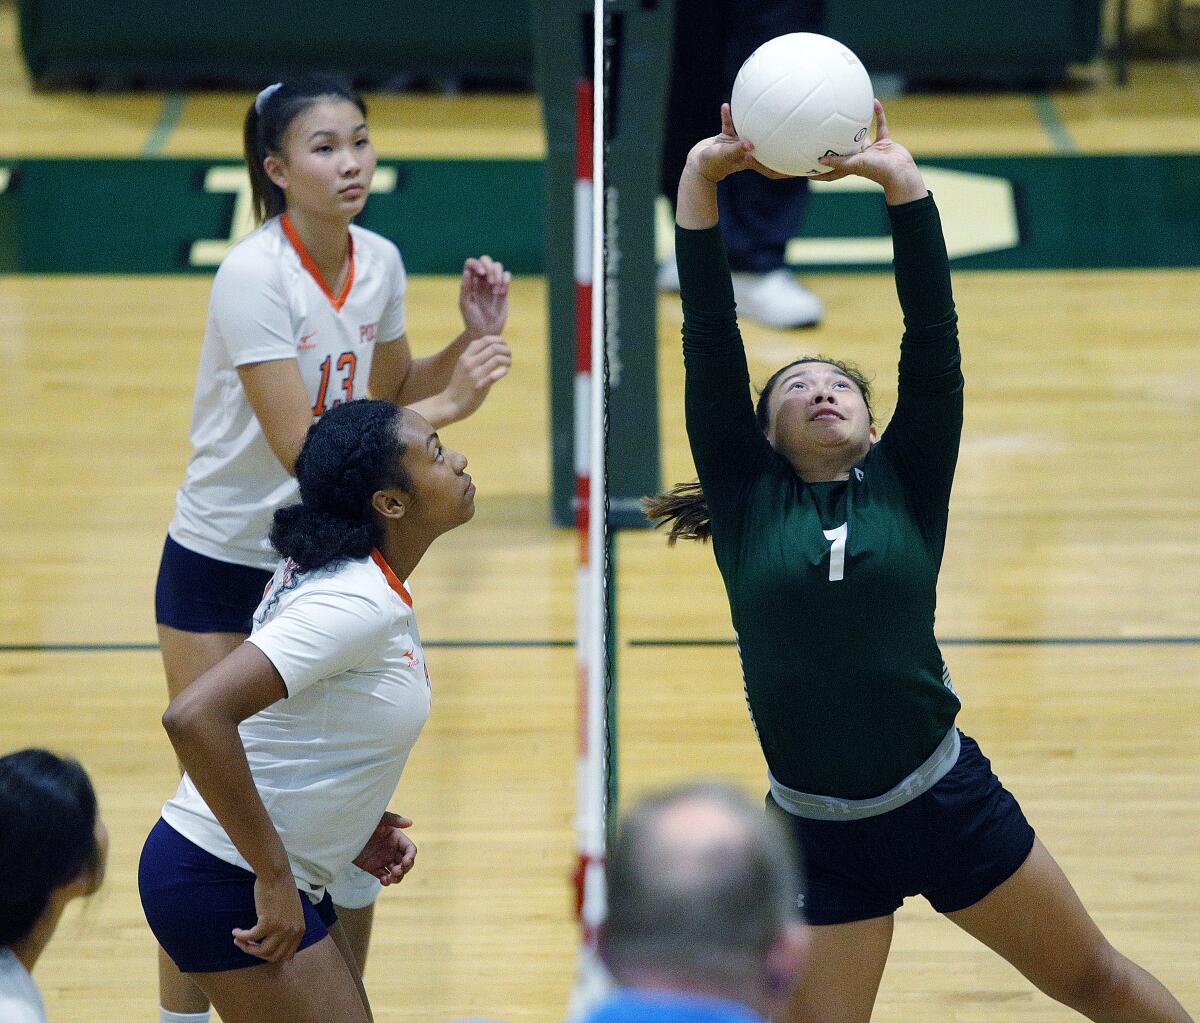 Providence's Jennifer Tolentino sets the ball for a kill against Polytechnic's Laila Ward in a Prep League girls' volleyball match at Providence High School on Tuesday, September 17, 2019.